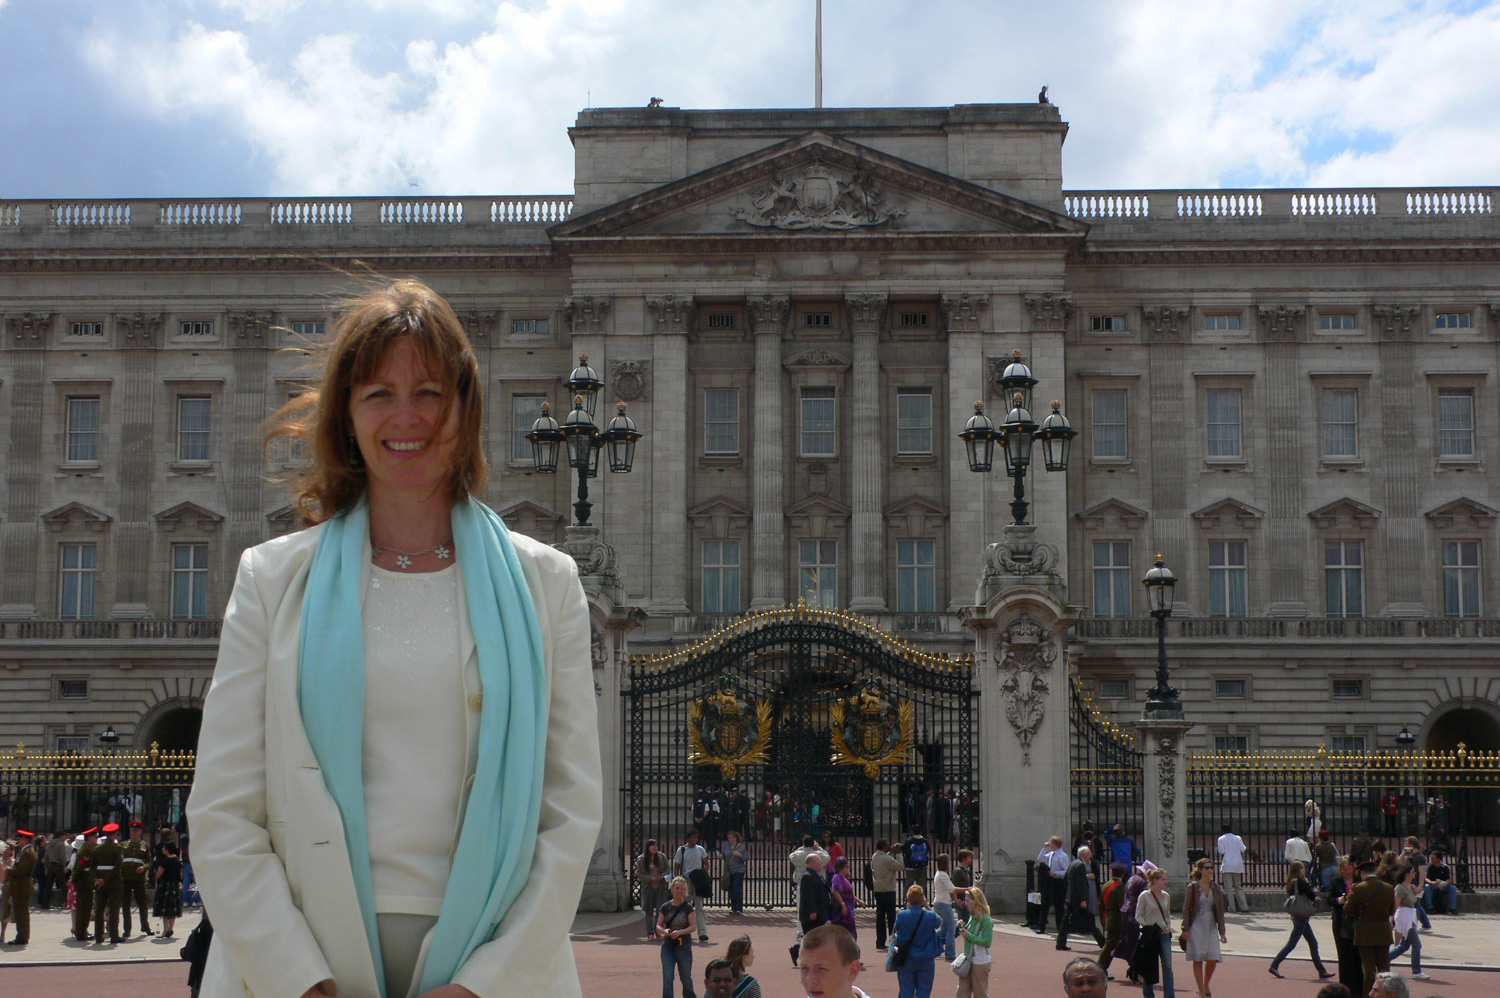 In front of Buckingham Palace